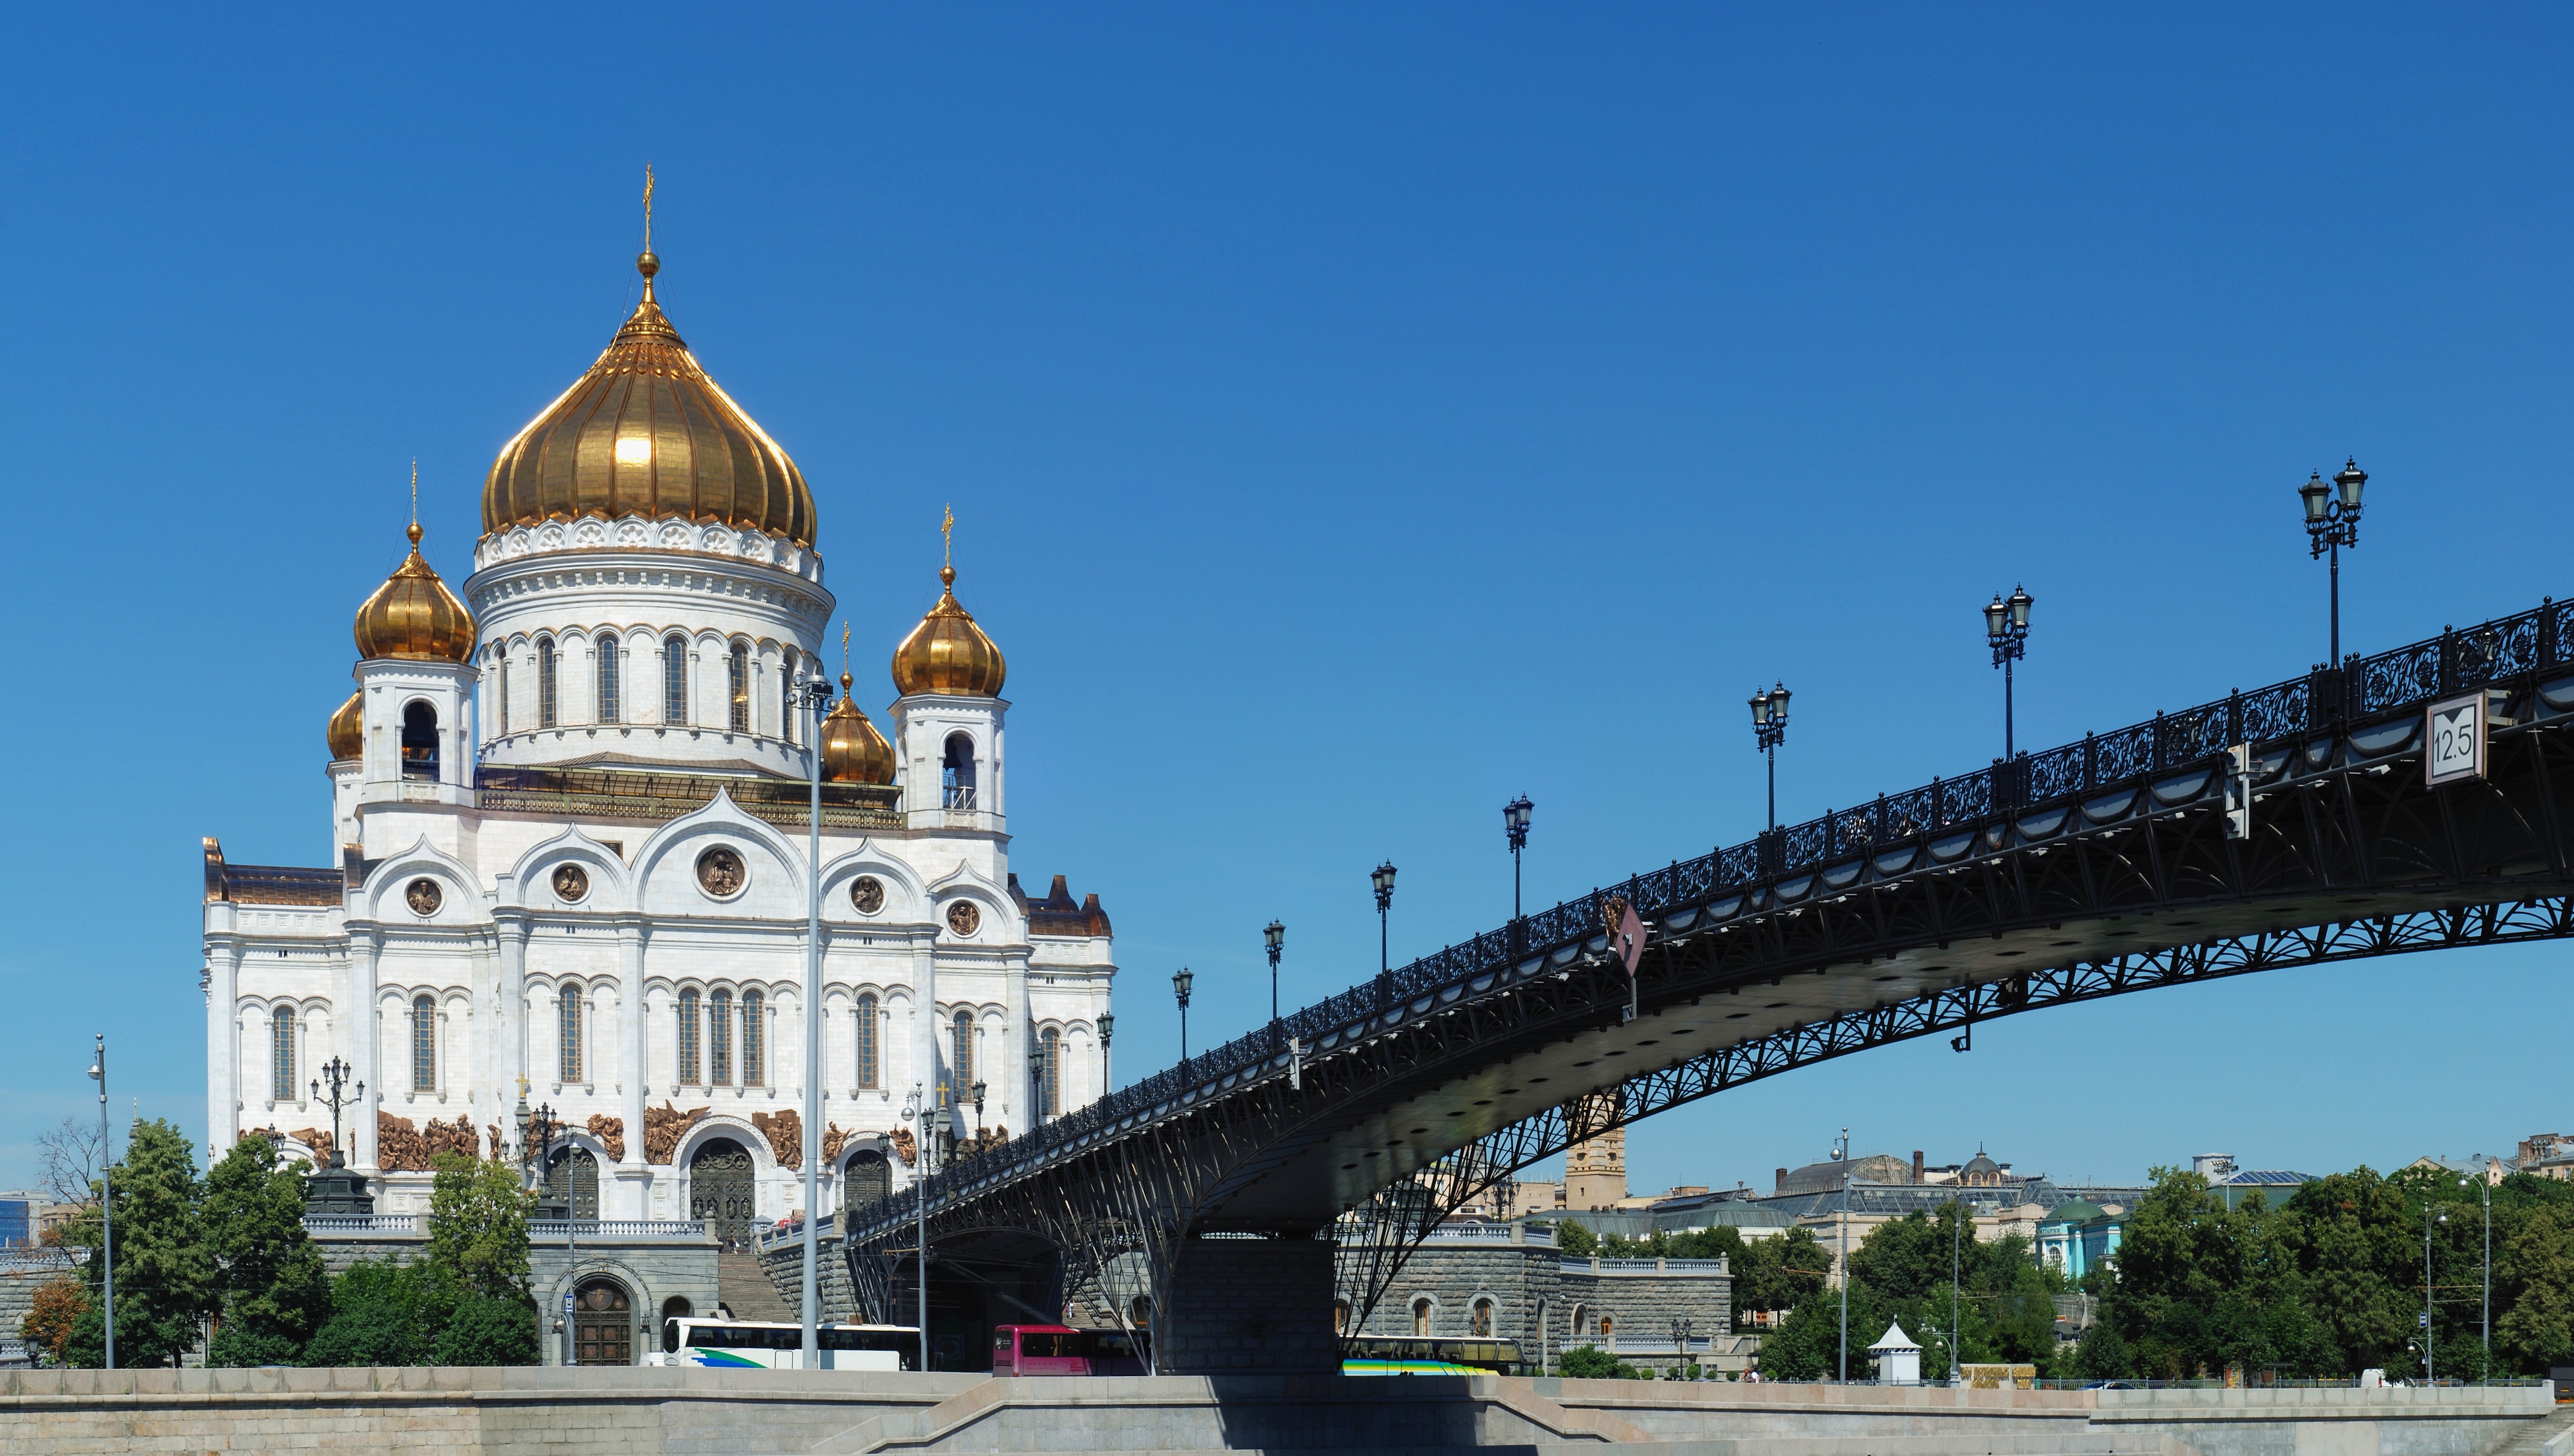 Cathedral of Christ the Saviour - Wikipedia